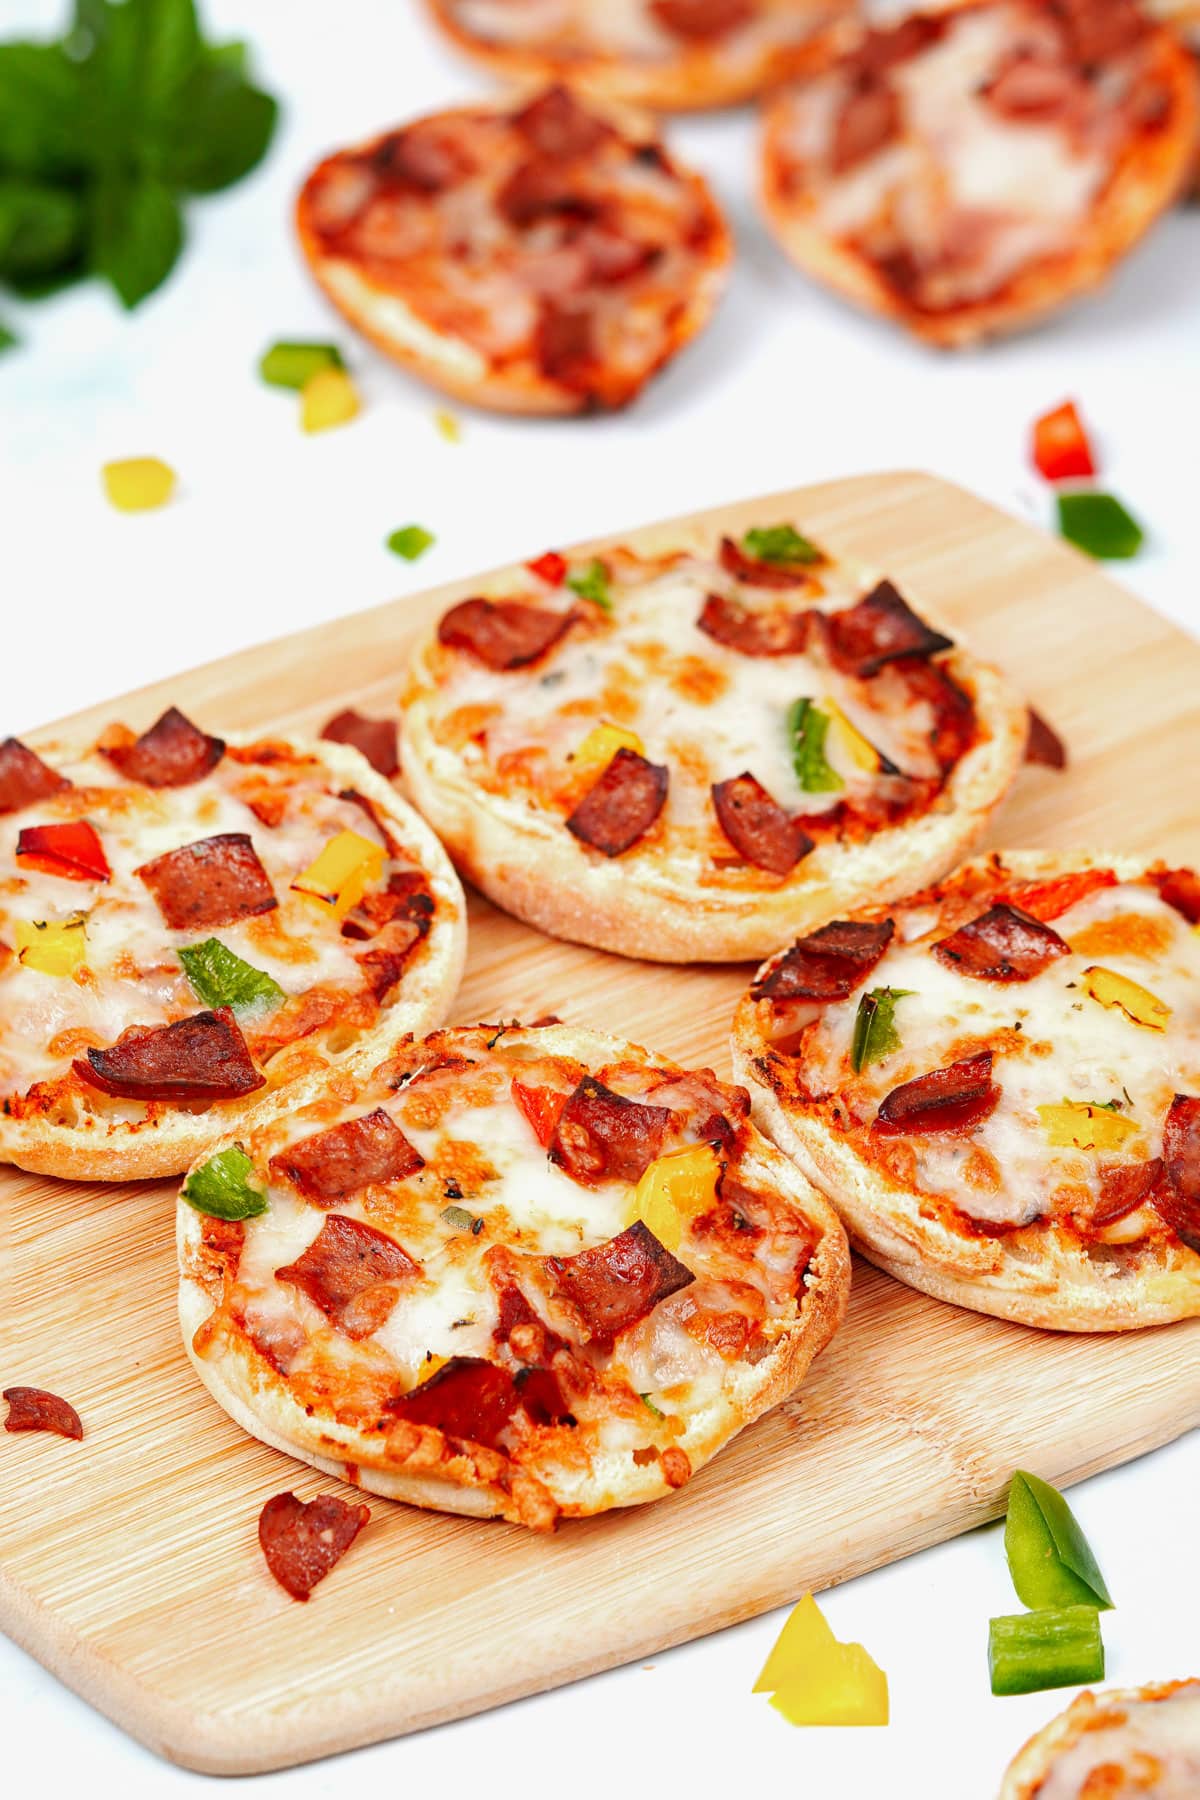 Air fryer English muffin pizza recibe bite shot, 4 slices on a bamboo chopping board.